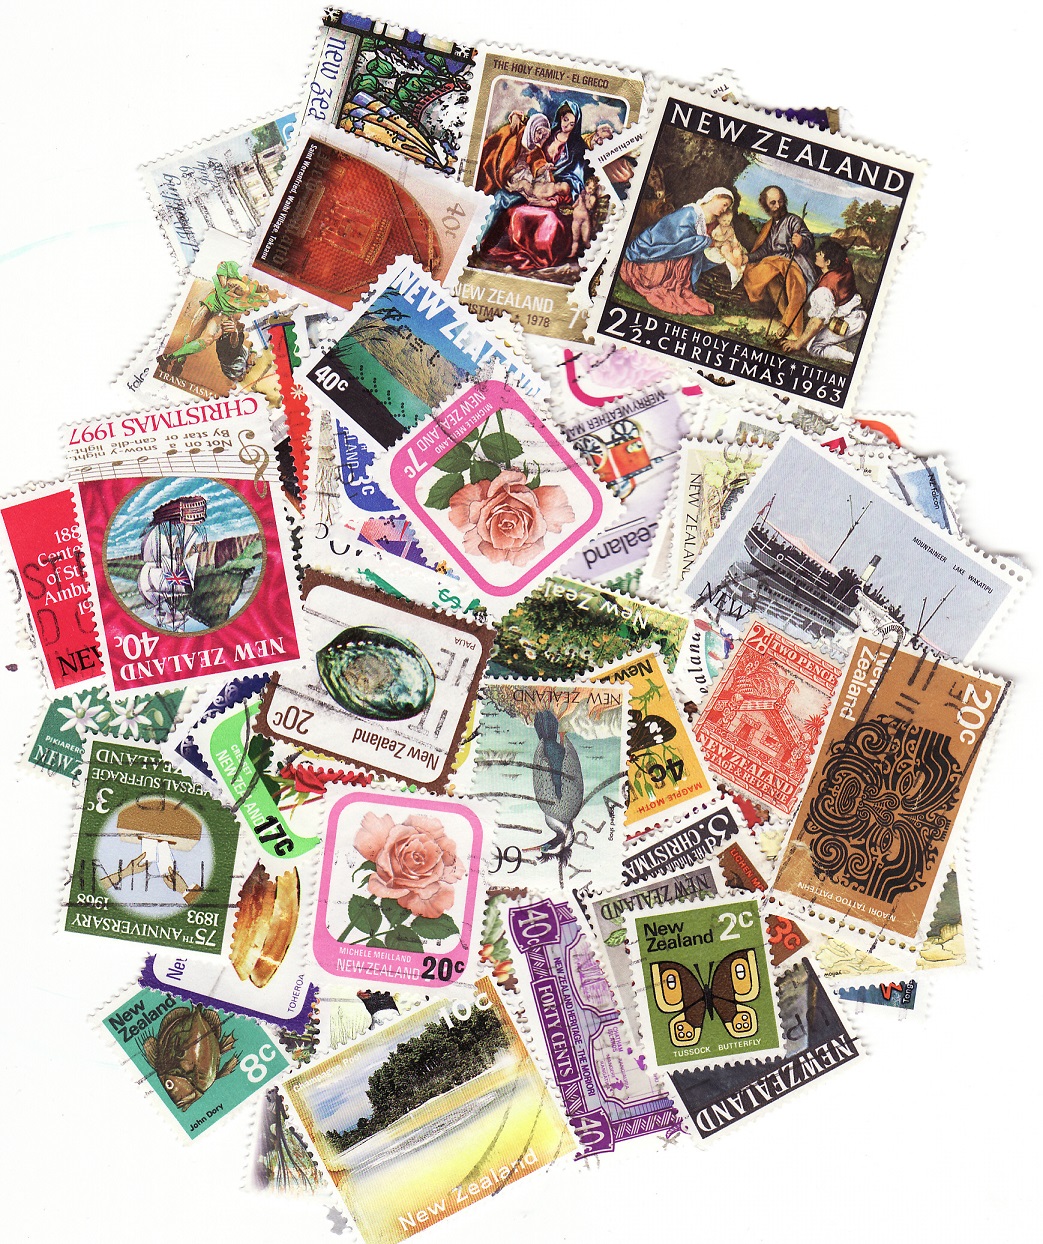 New Zealand Pictorials Stamp Packet, 100 different stamps from New Zealand